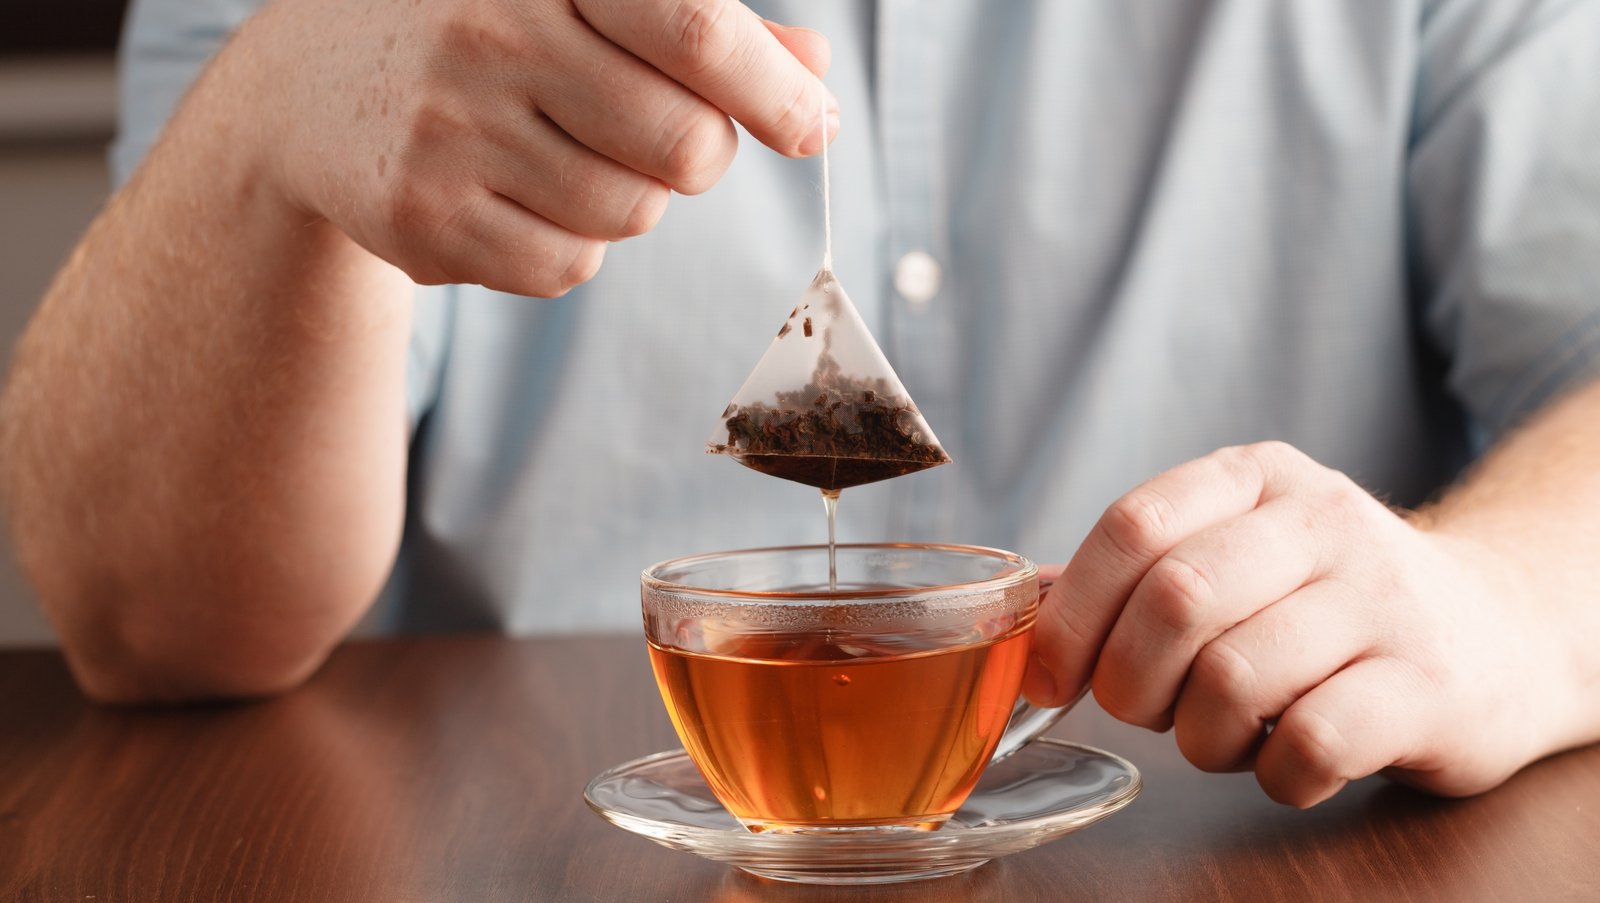 Study reveals the secret to making perfect tea may be a microwave